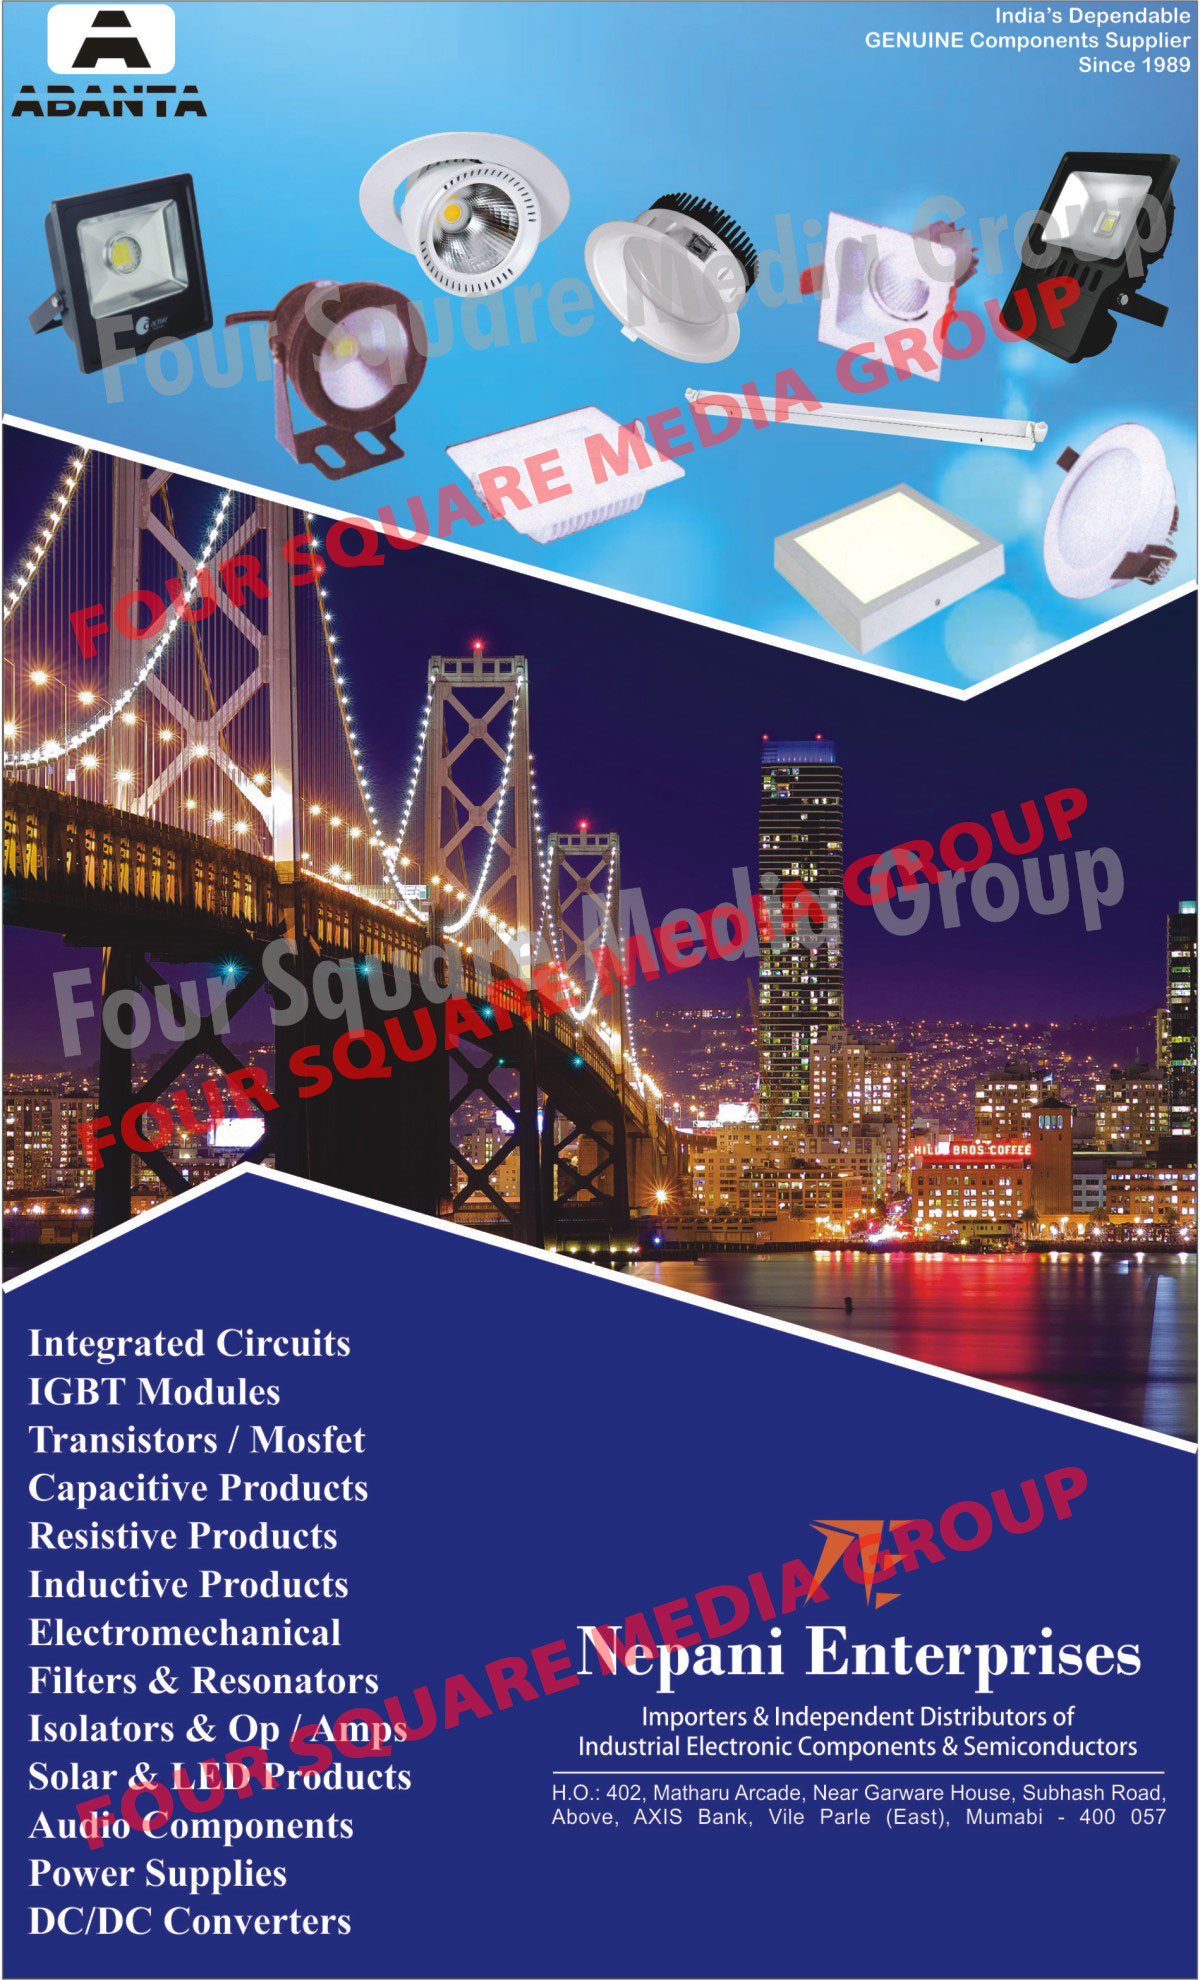 Industrial Electronic Components, Semiconductors, Integrated Circuits, IGBT Modules, Transistors, Mosfets, Capacitive Products, Resistive Products, Inductive Products, Electromechanical Products, Filters, Resonators, Isolators, OP, AMPS, Solar Products, LED Products, Audio Components, Power Supply, DC to DC Converters, Led Lights, Led Components